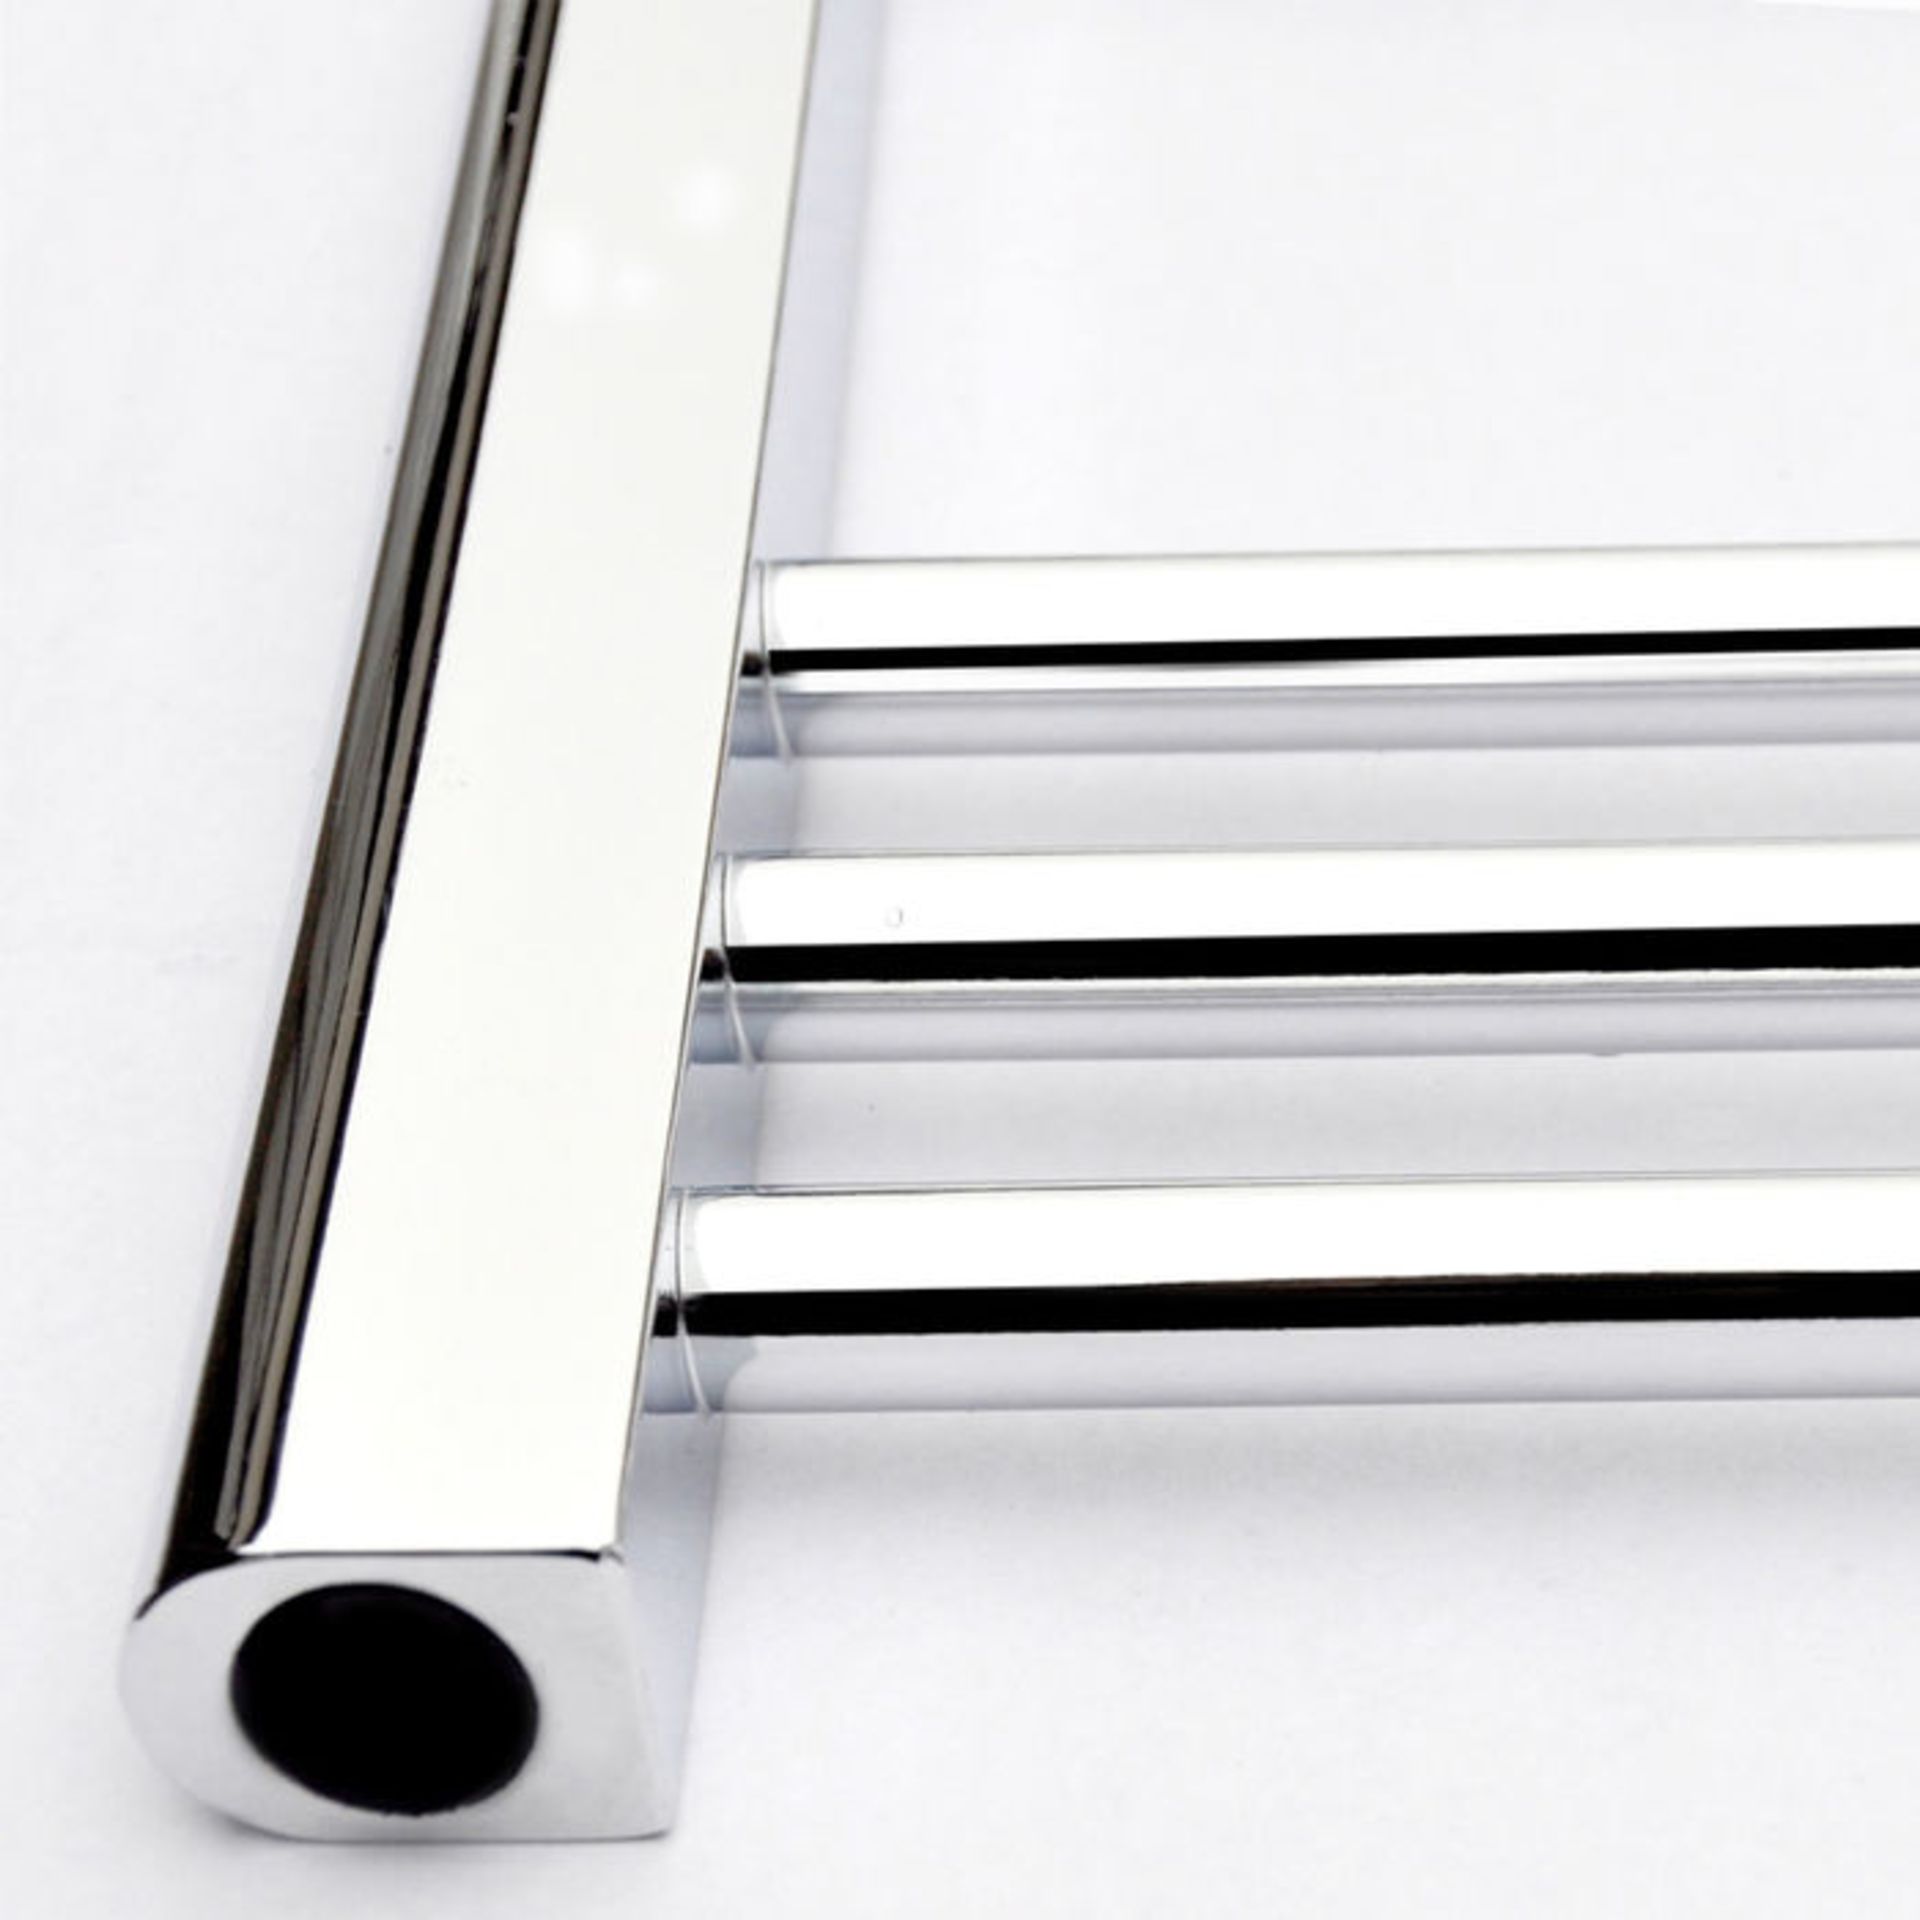 (H4) 1600x400mm - 20mm Tubes - Chrome Heated Straight Rail Ladder Towel Radiator. Low carbon steel - Image 5 of 5